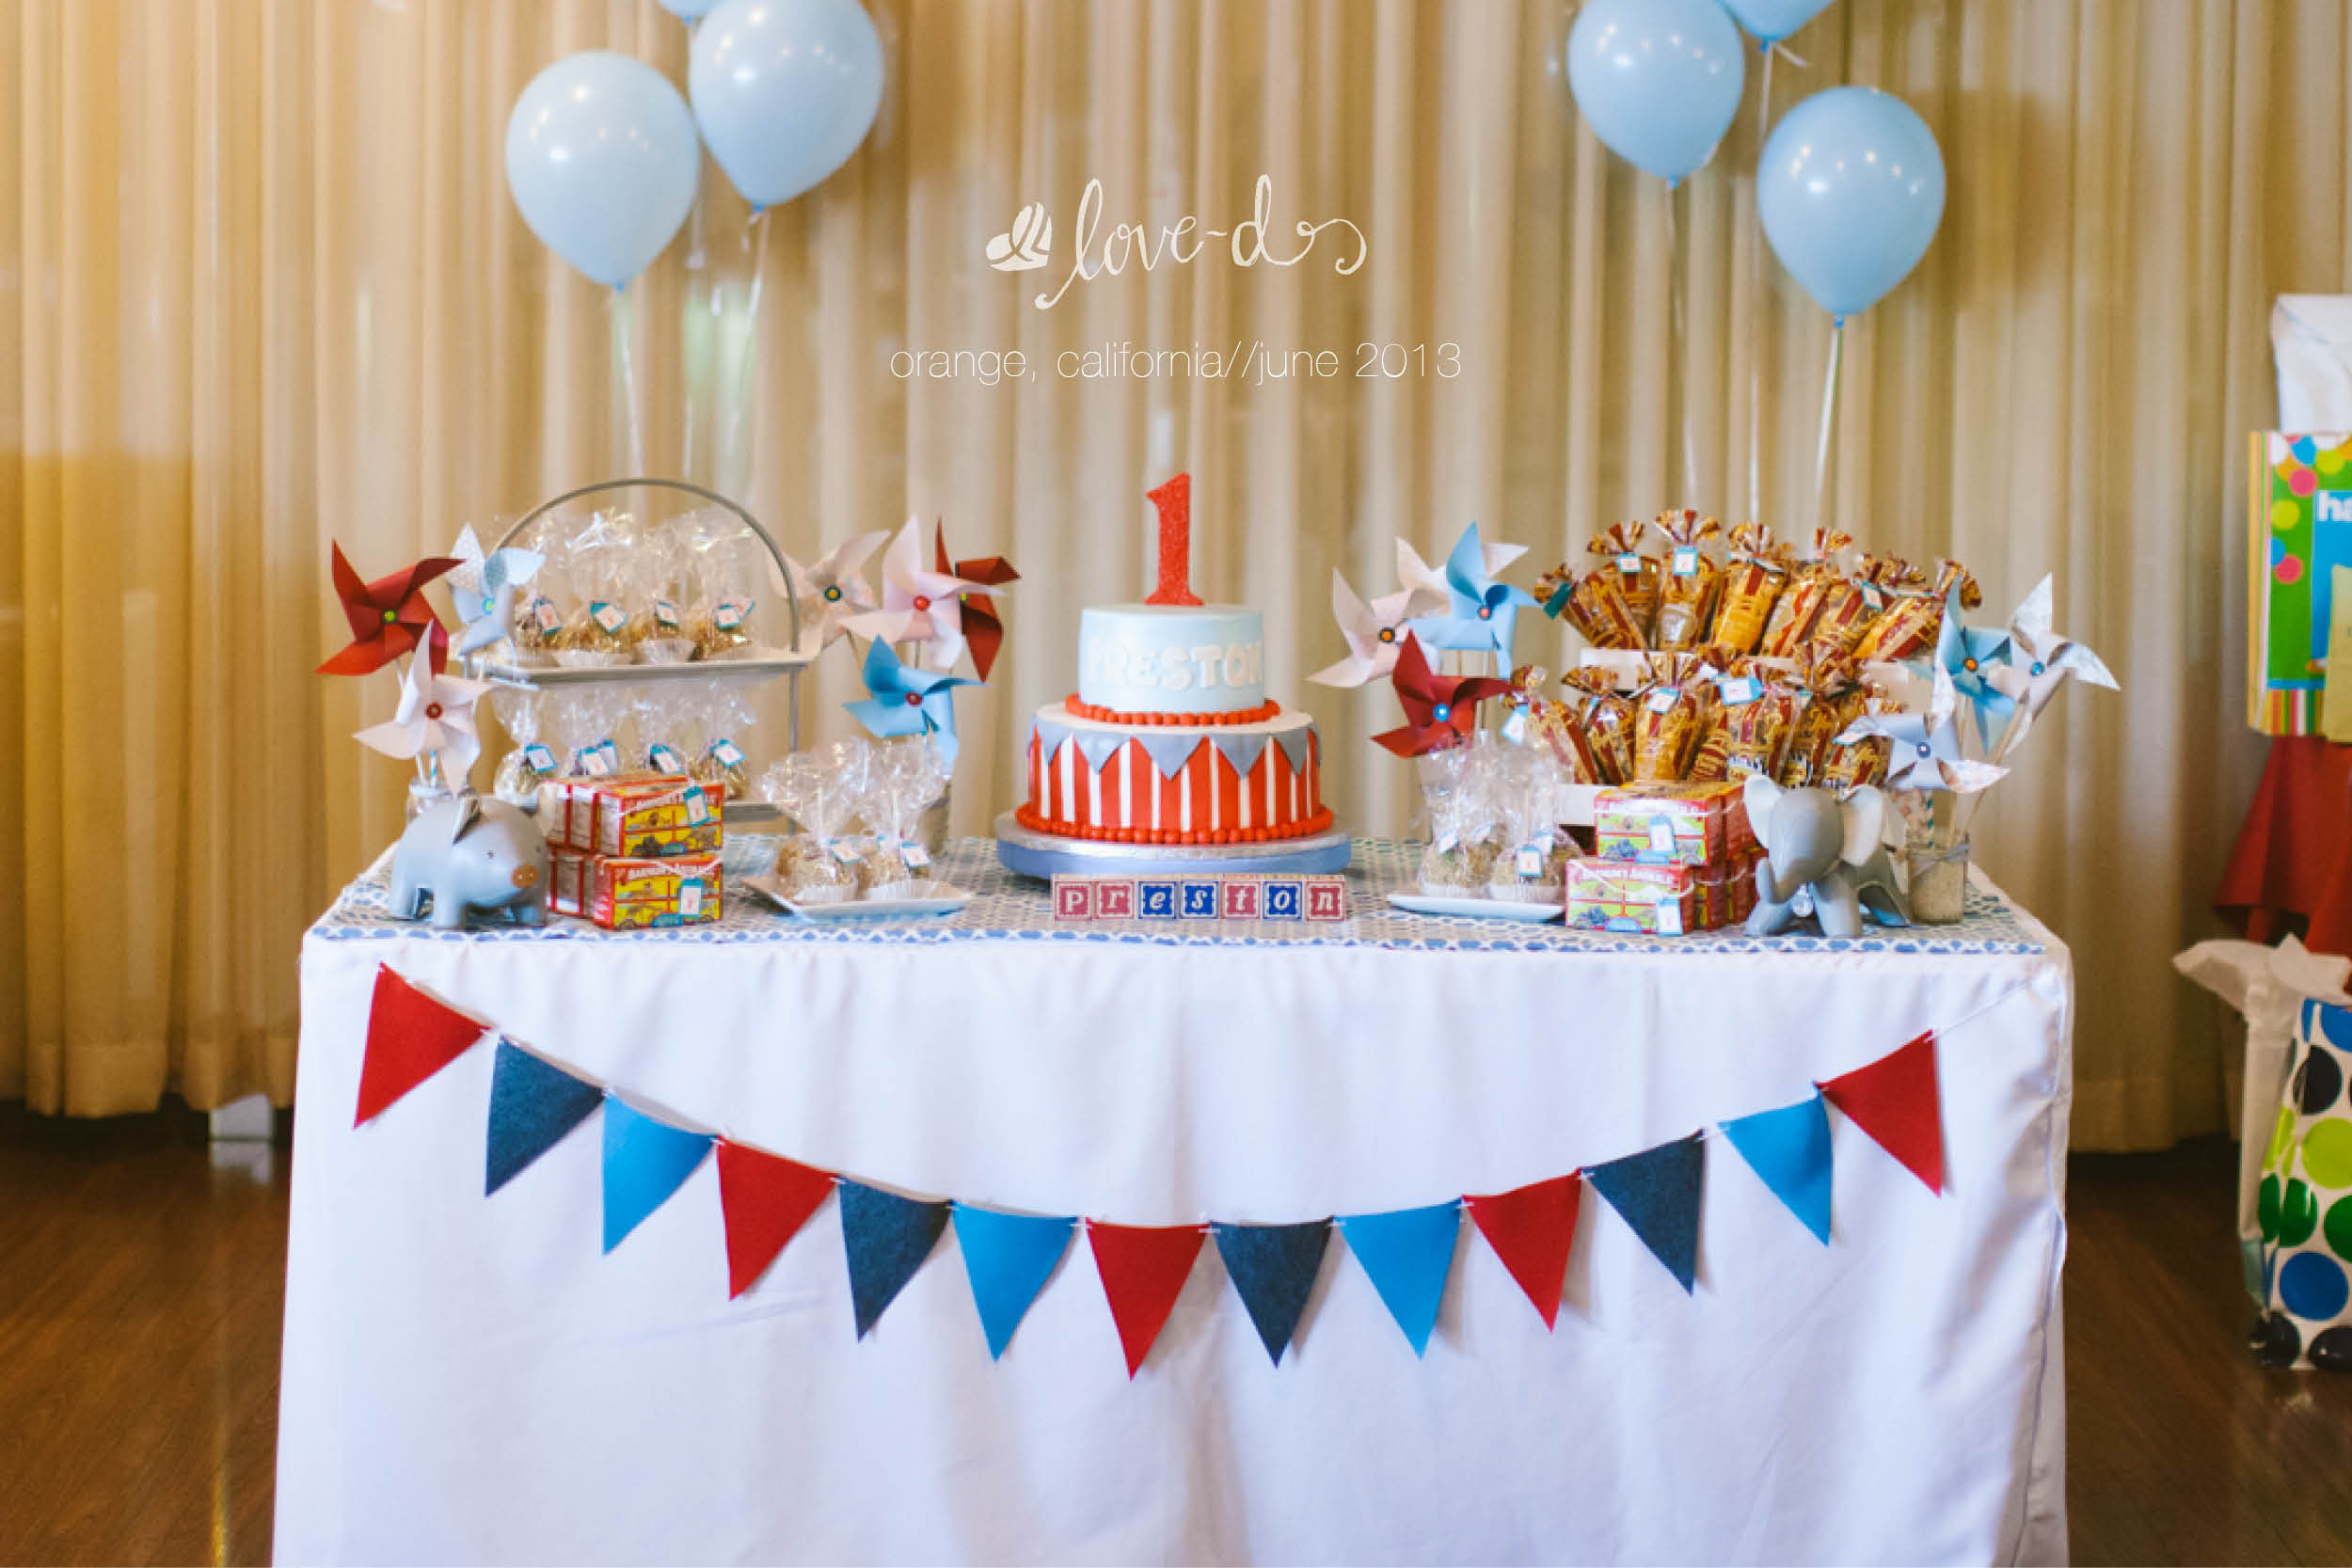 Cake Table Decorations For Birthday
 How to create a dessert table for your child s birthday